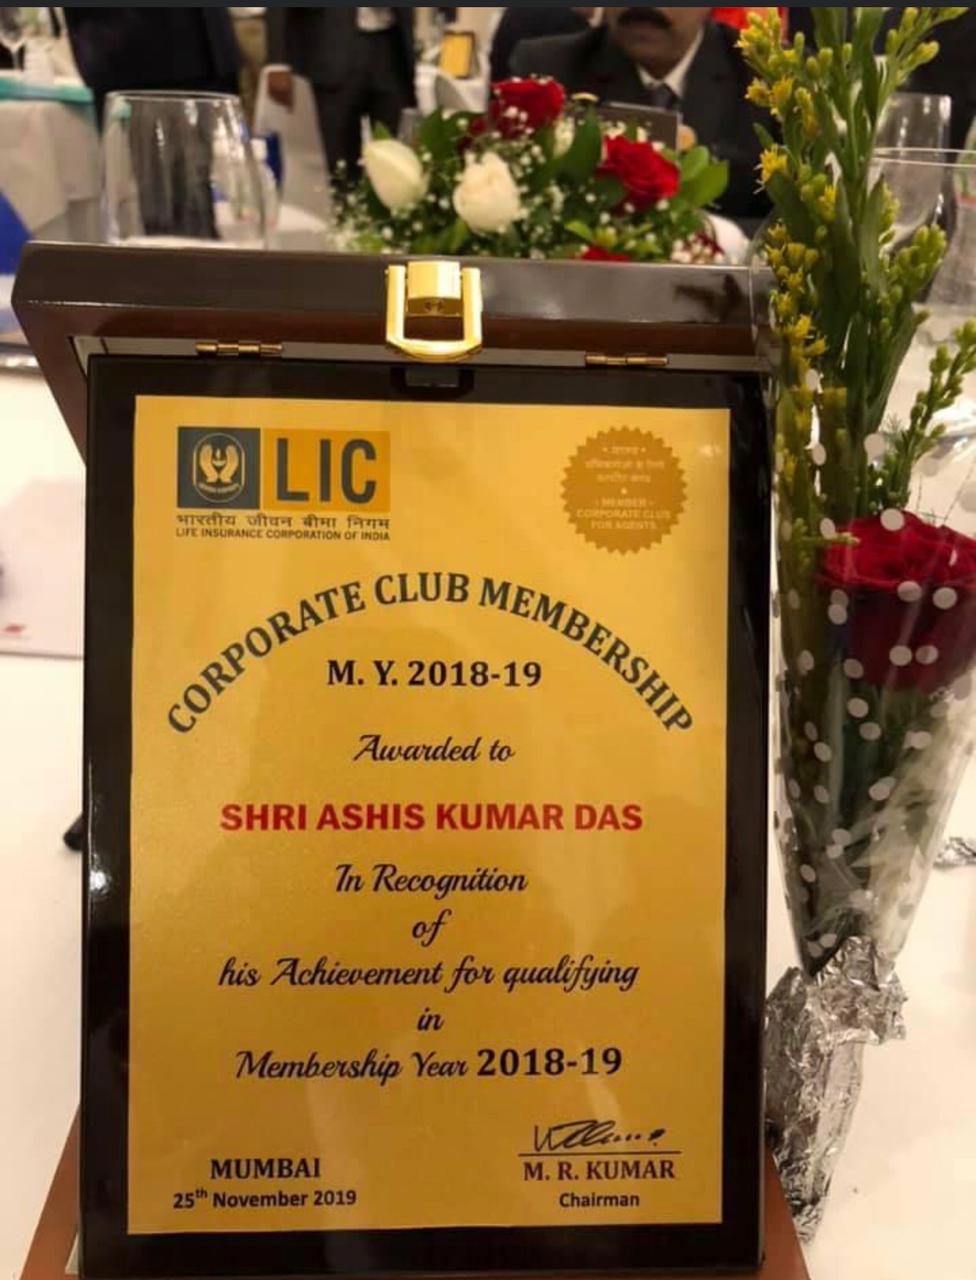 Awarded for Achievement Qualifying Membership